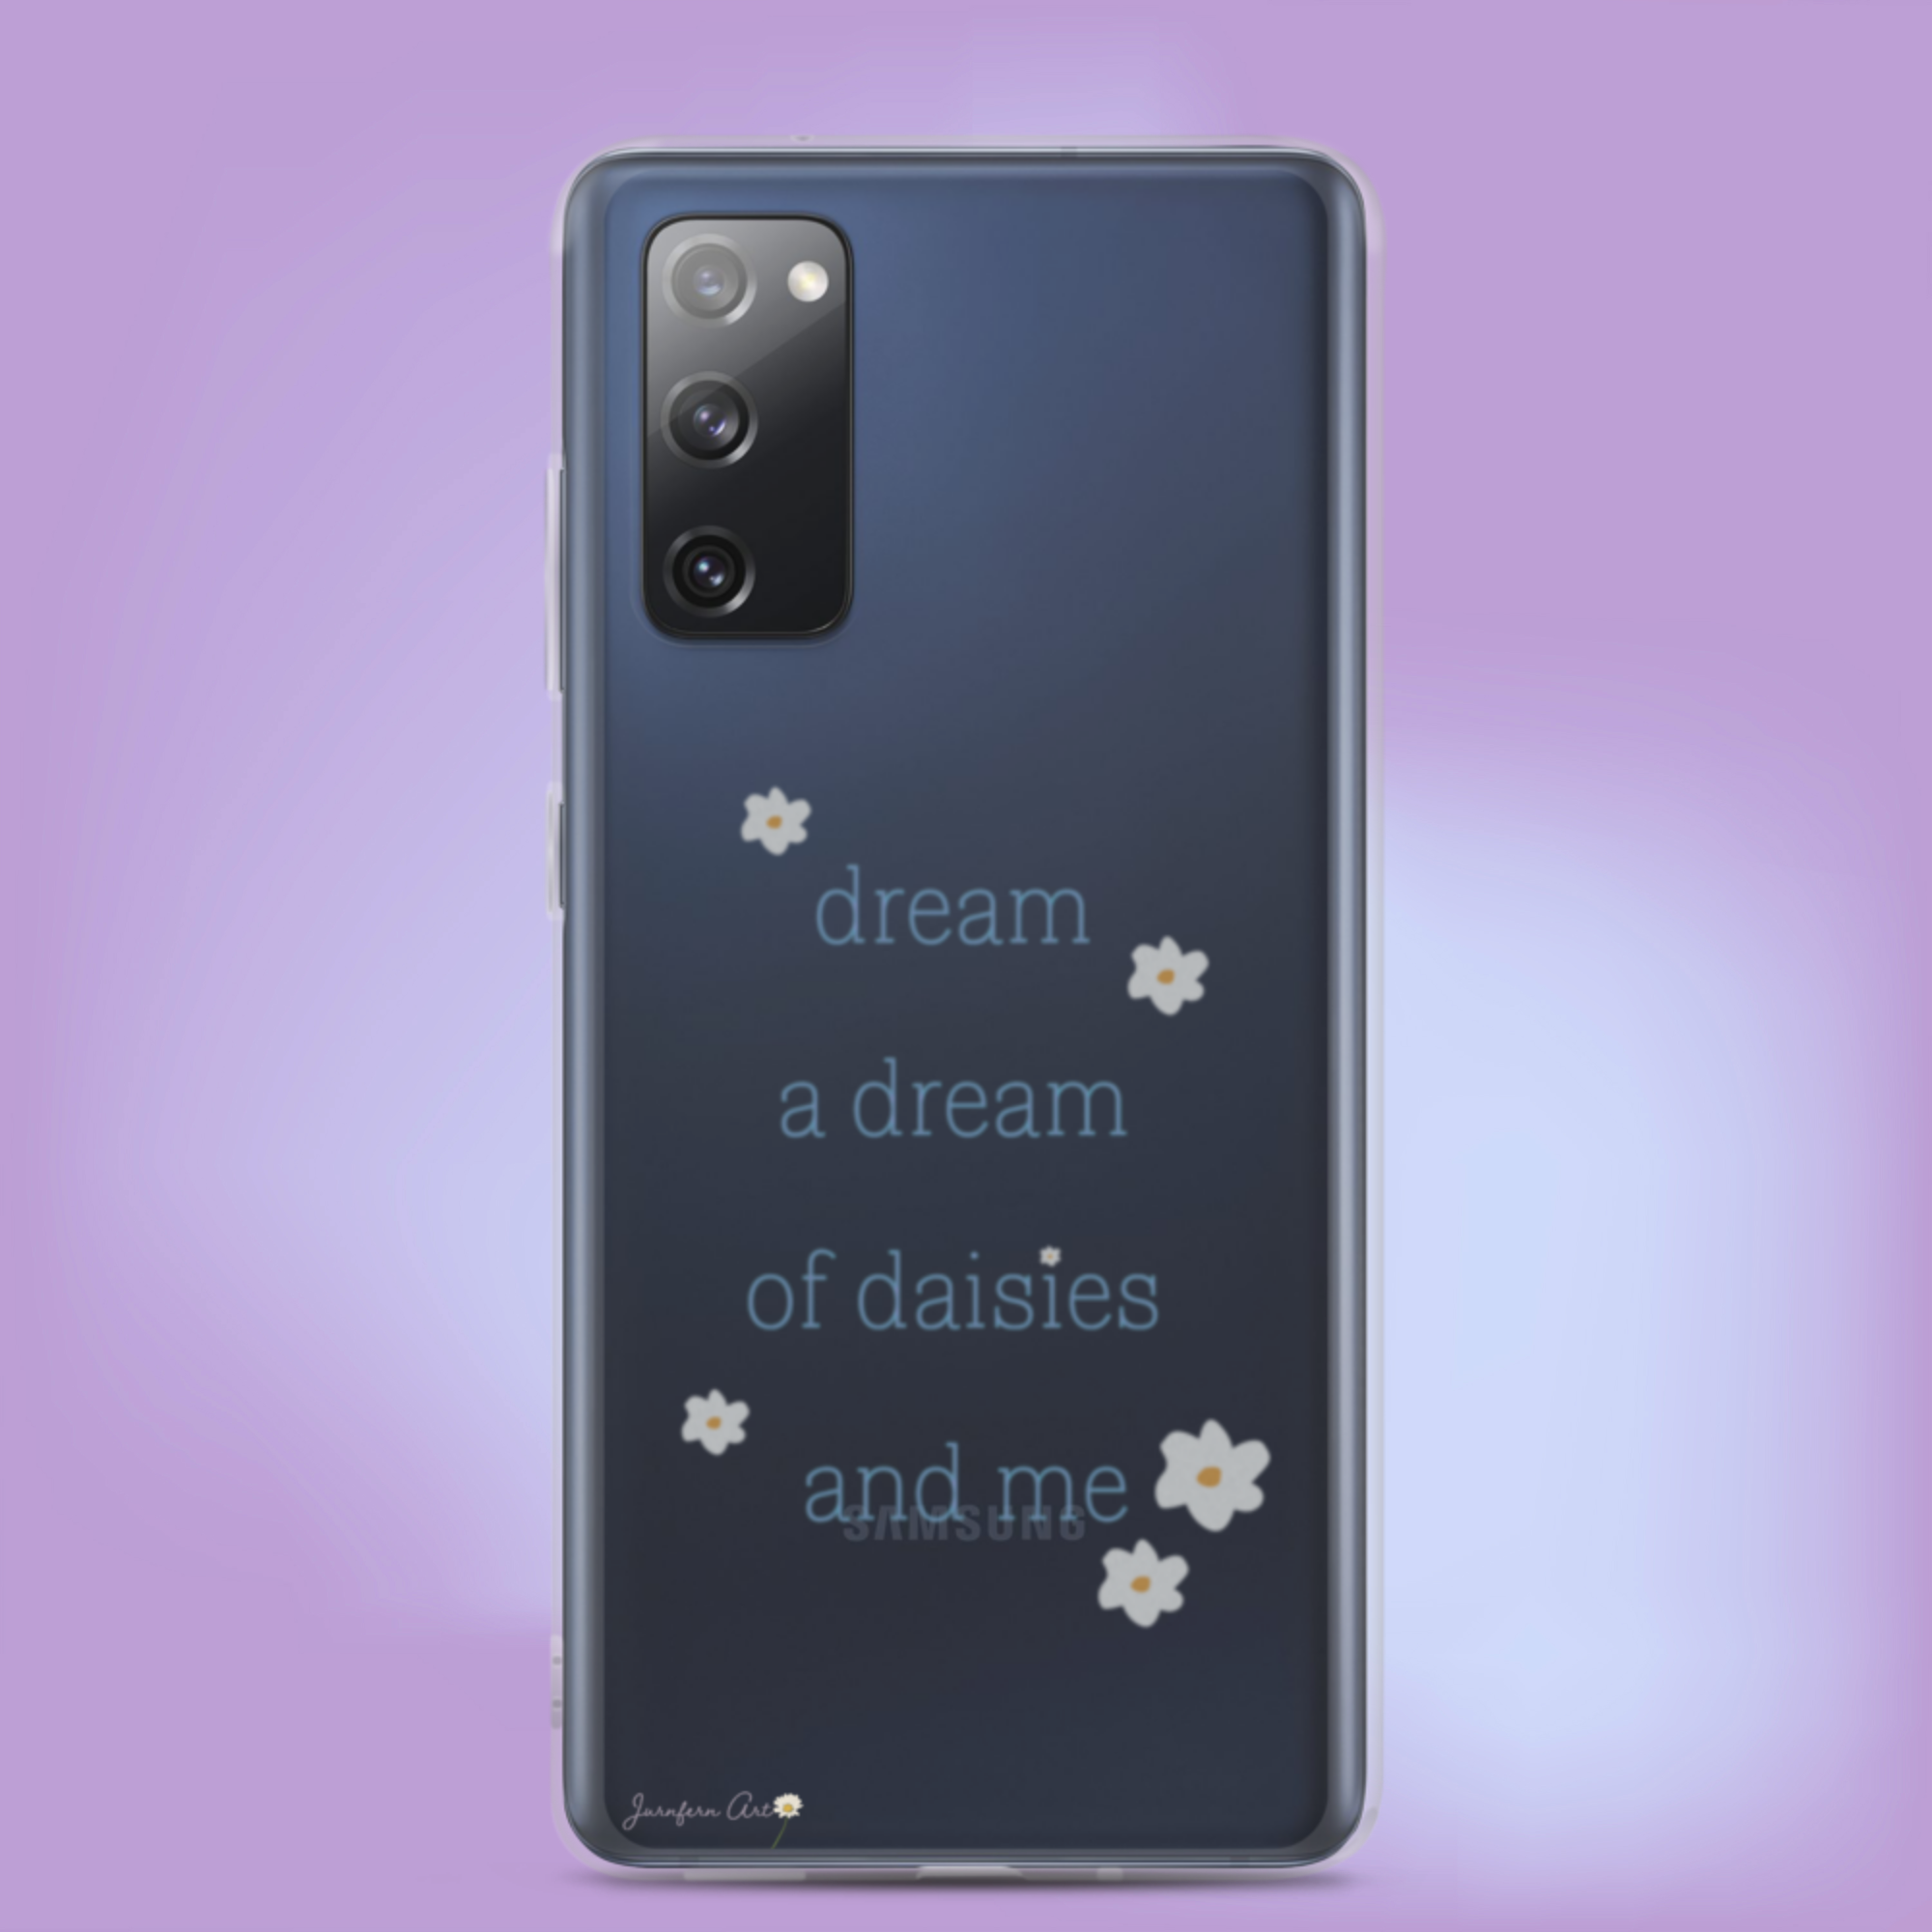 A transparent Samsung Galaxy S20 FE phone case with blue text on it that reads "dream a dream of daisies and me" surrounded by small daisies